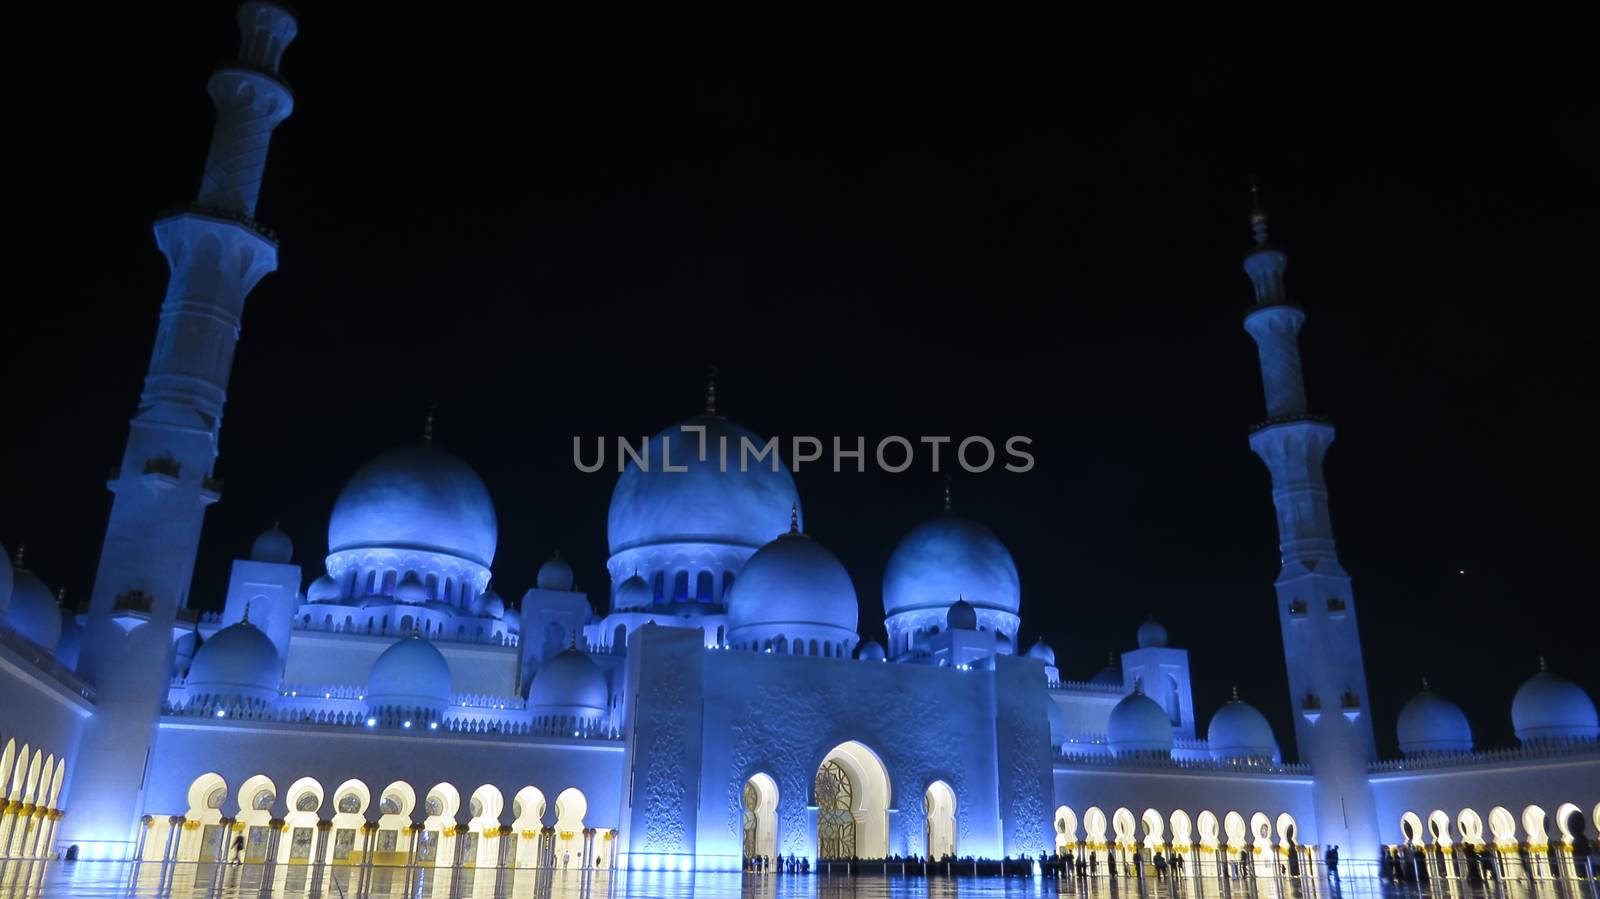 Grand Mosque Abu Dhabi by thefinalmiracle